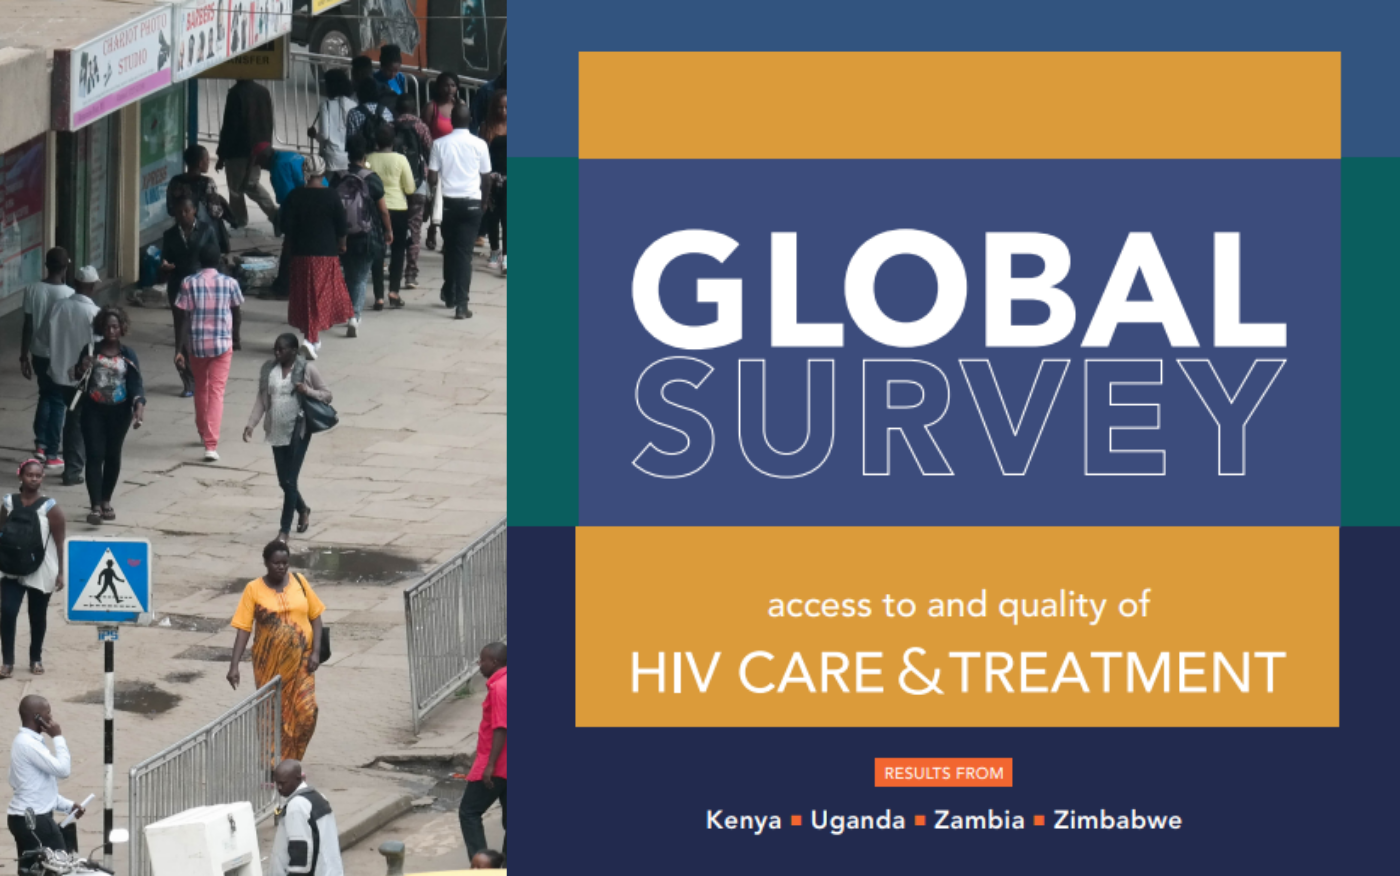 Global survey access to and quality of HIV care and treatment - east and southern africa (uganda, kenya, zambia, zimbabwe)